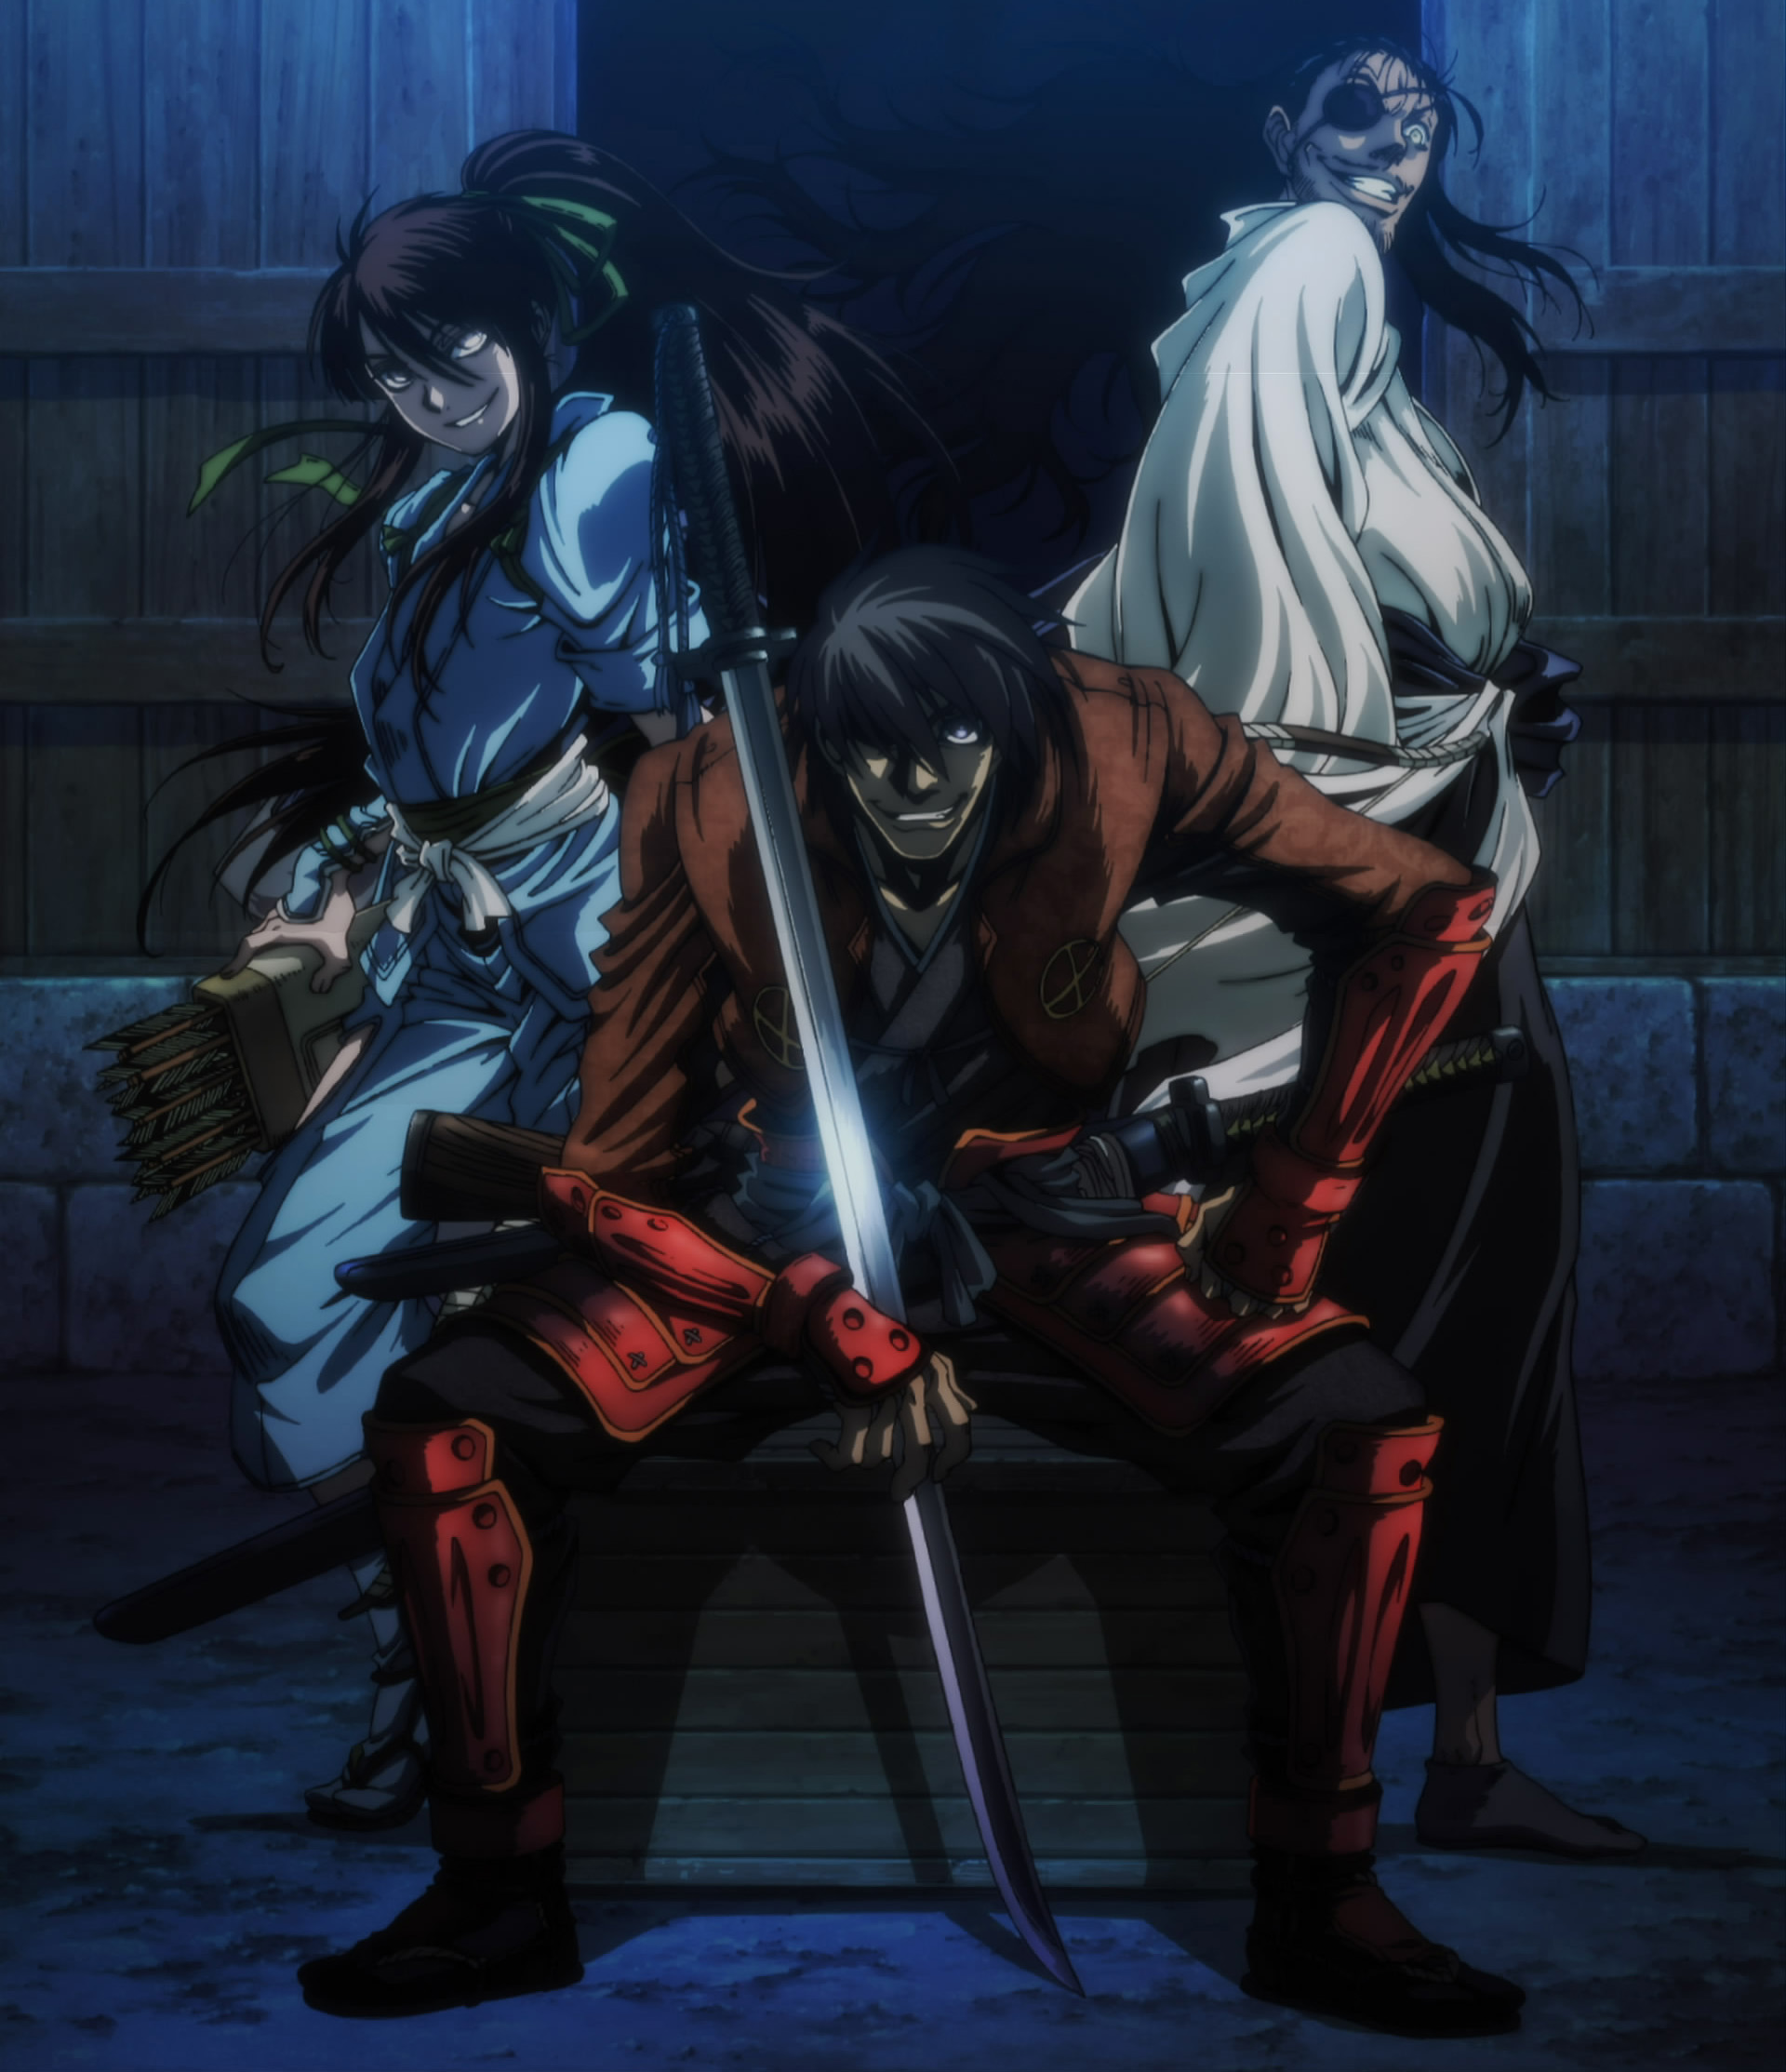 Drifters PV, BURSTING ONTO CRUNCHYROLL THIS FALL, FROM THE AUTHOR OF  HELLSING: 󾓶DRIFTERS󾓶, By Crunchyroll